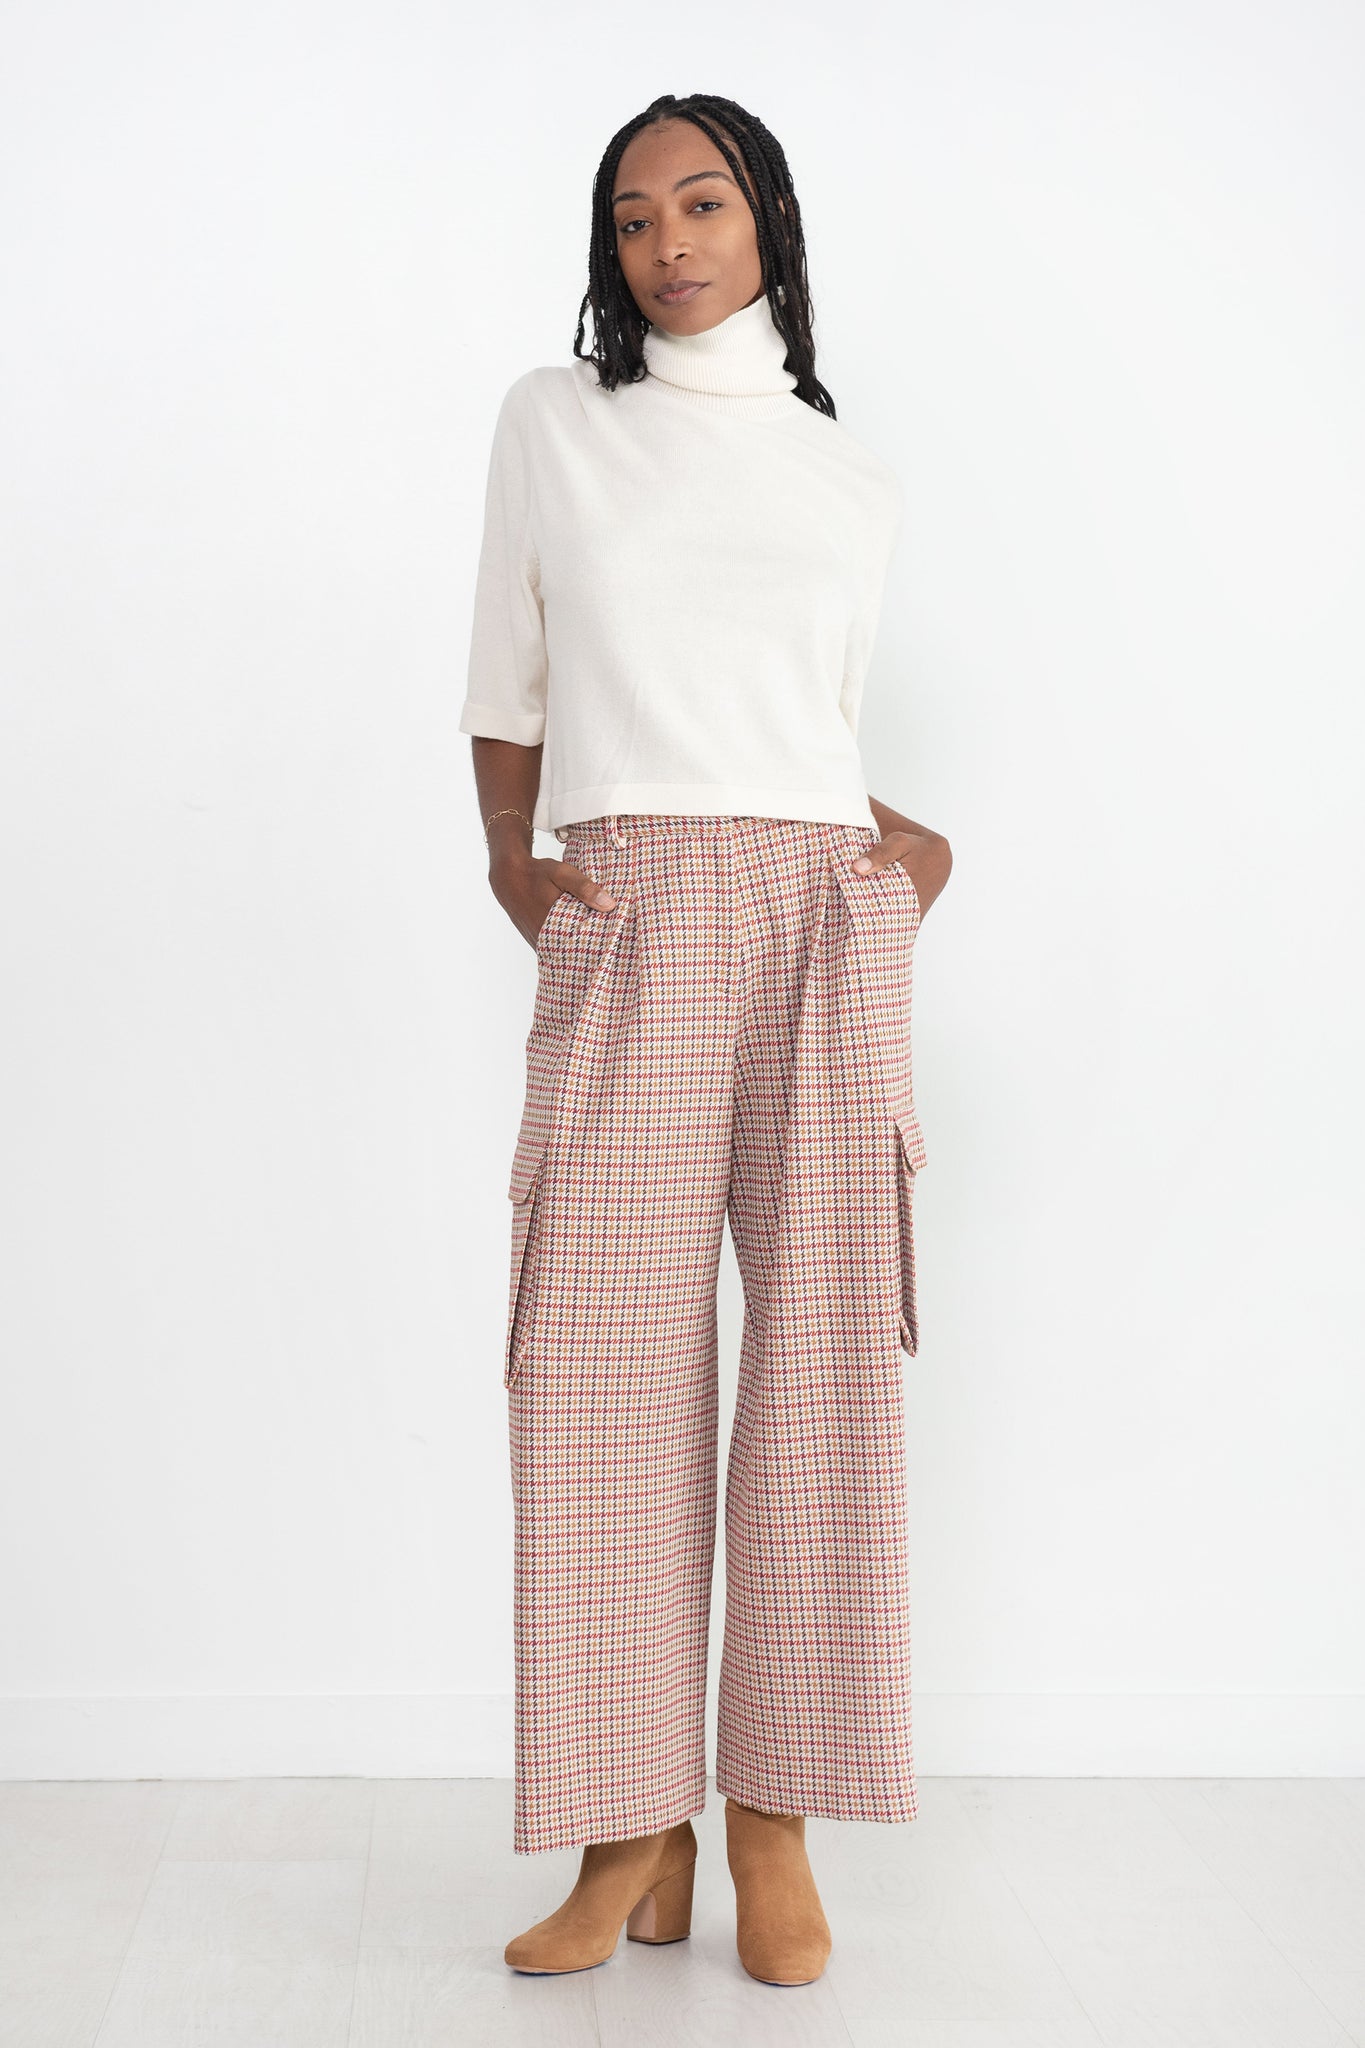 ROSETTA GETTY - Pleated Cargo Pant, Houndstooth